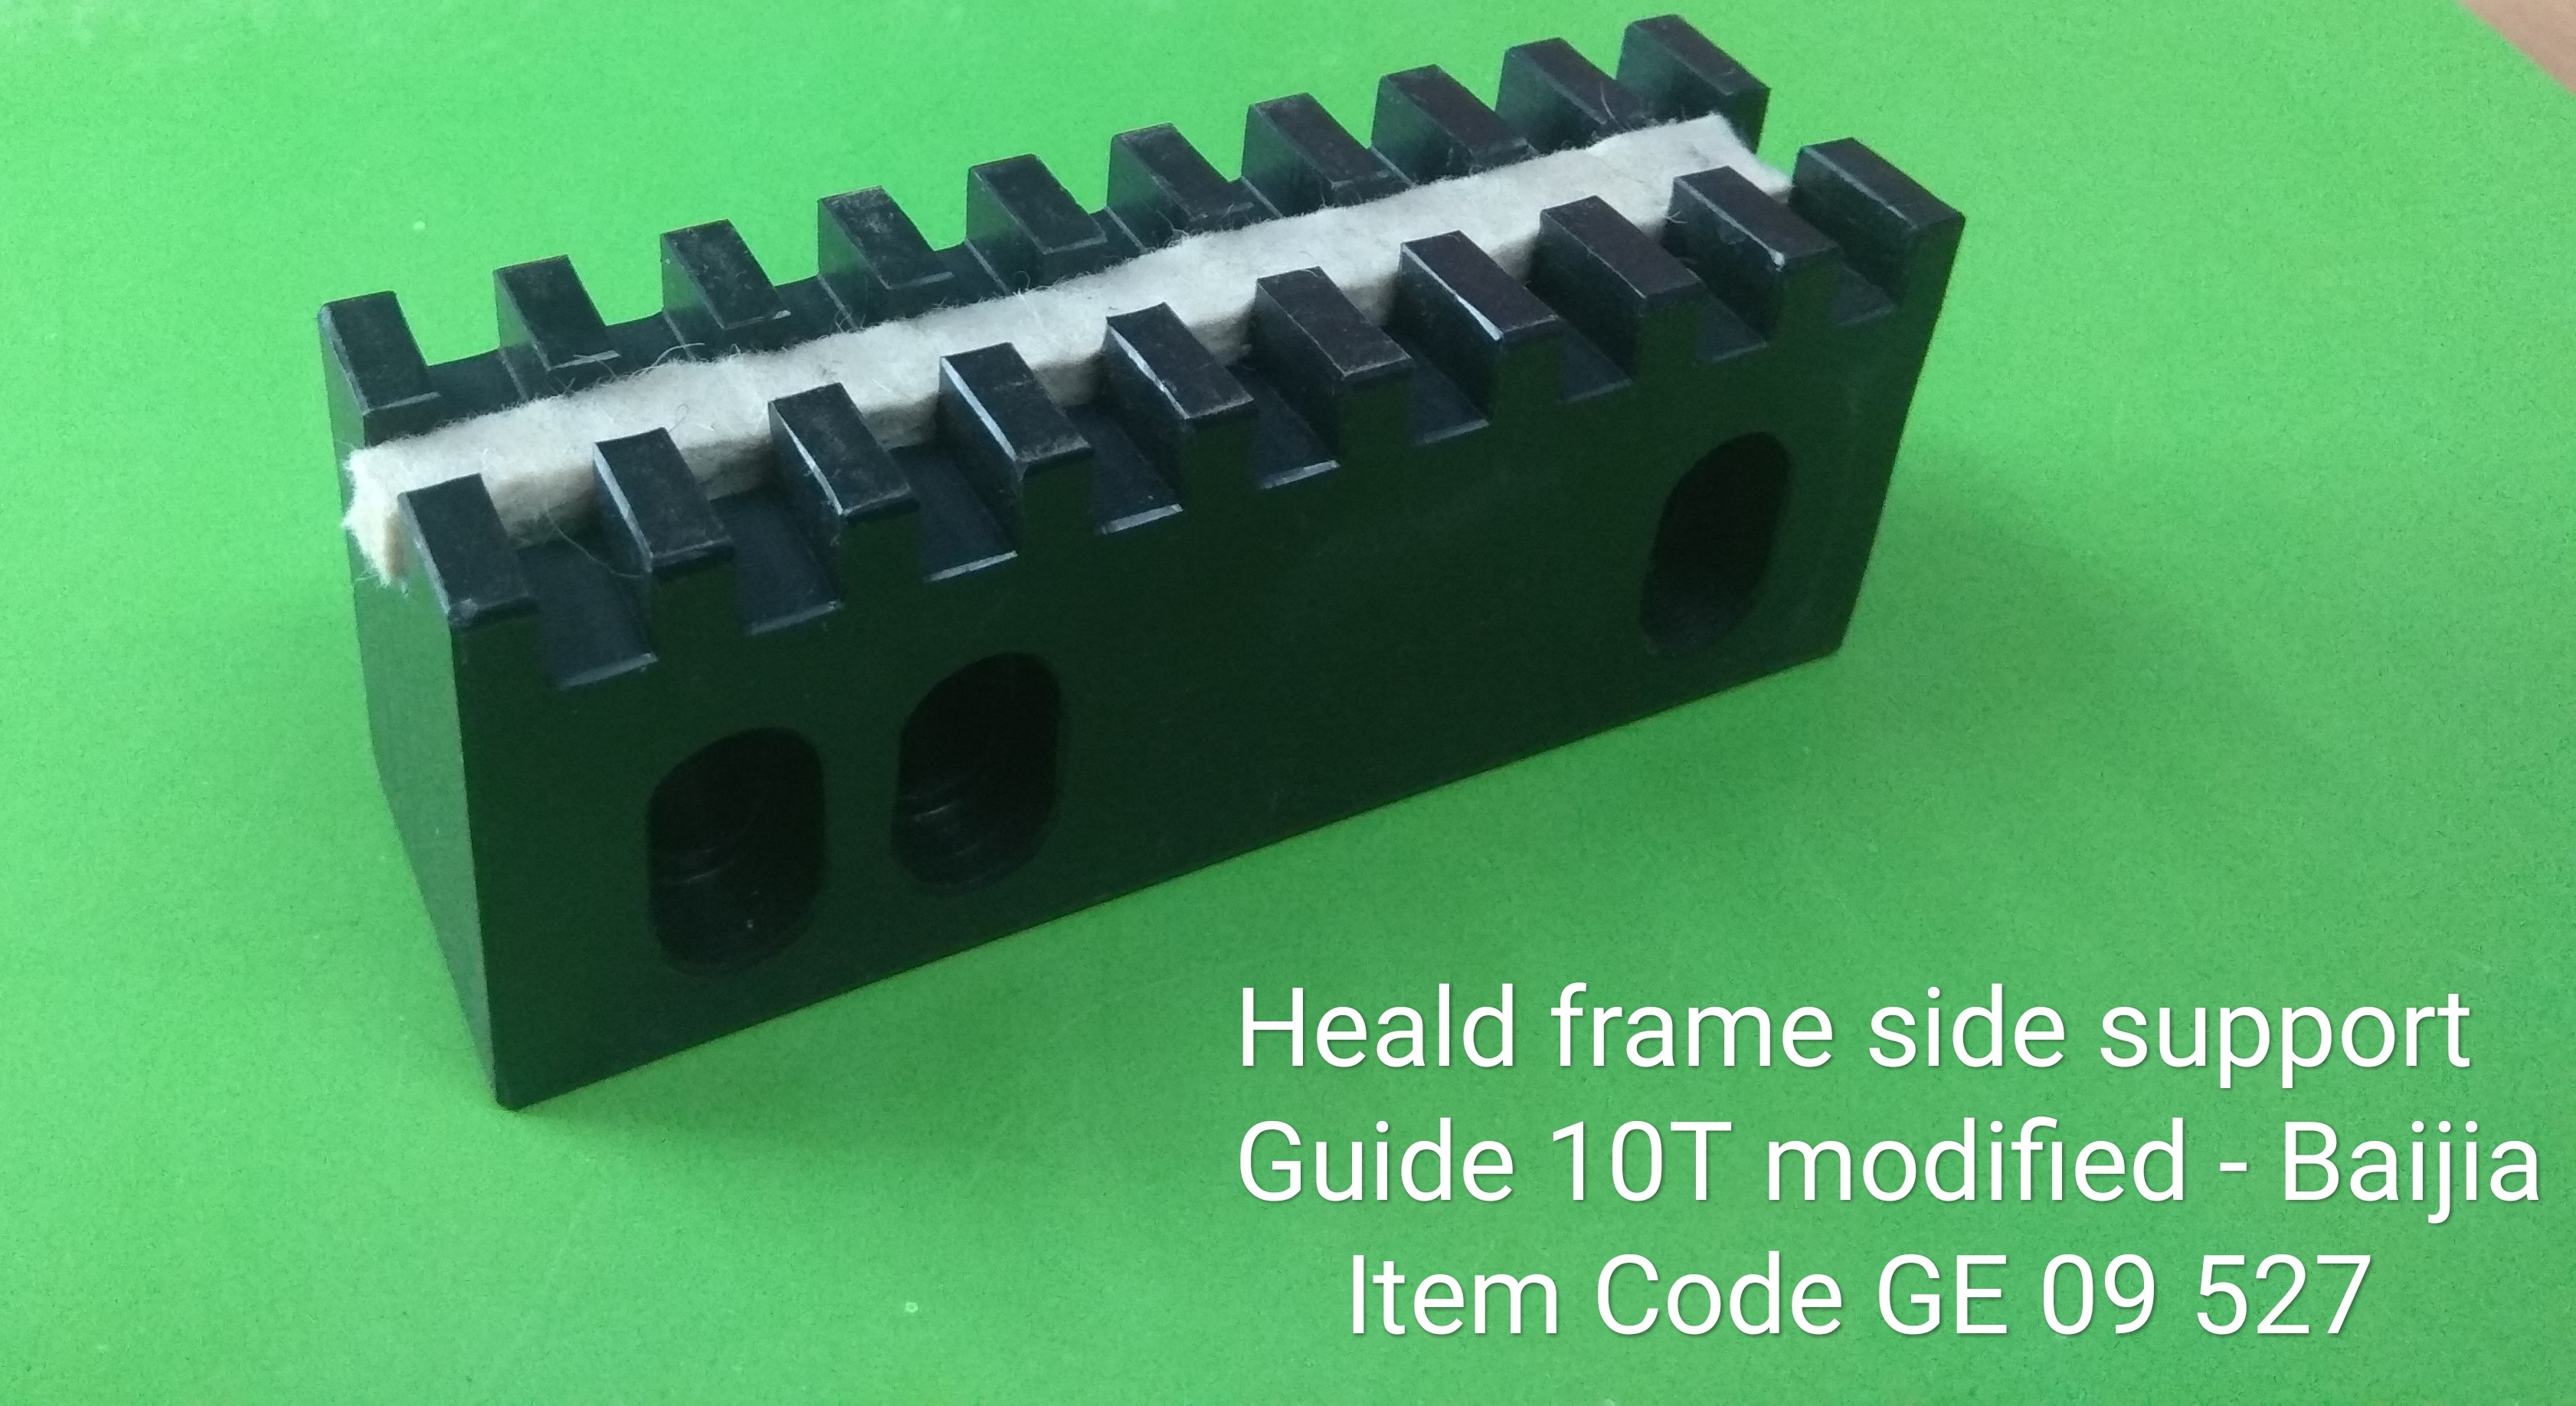 GE_09_527_Heald_Frame_Side_Support_Guide_10T_modified_1_12.jpg